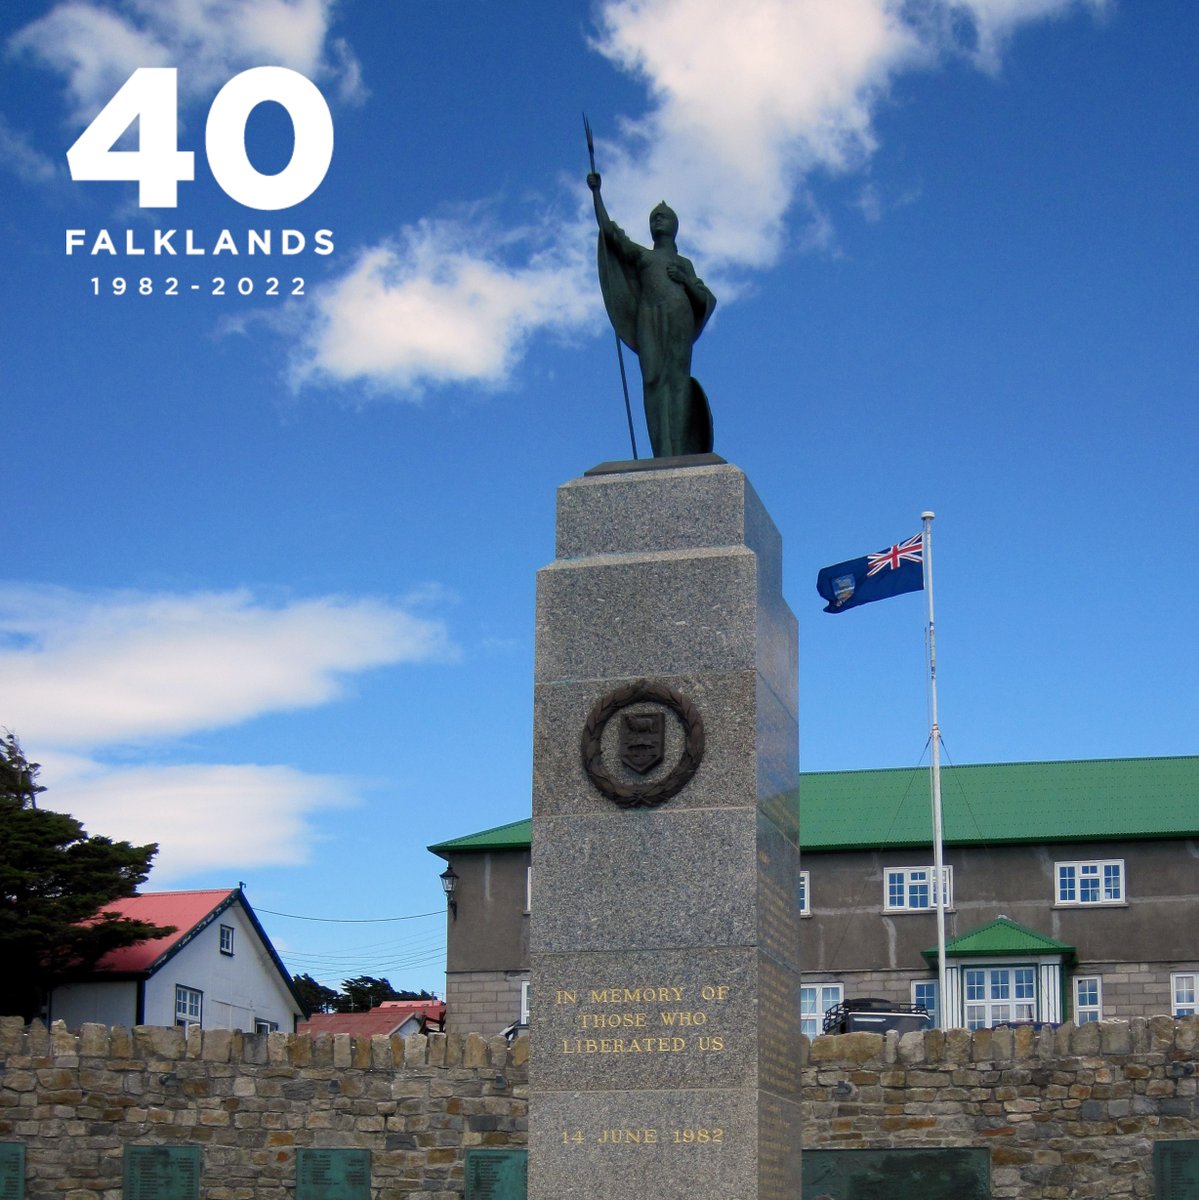 As we mark #RemembranceDay2022, we remember the Falklands Conflict that took place 40 years ago and the lives of those 255 British personnel and 3 civilians lost. Our thoughts today are also with those still living with the memories and scars of the conflict. #LestWeForget